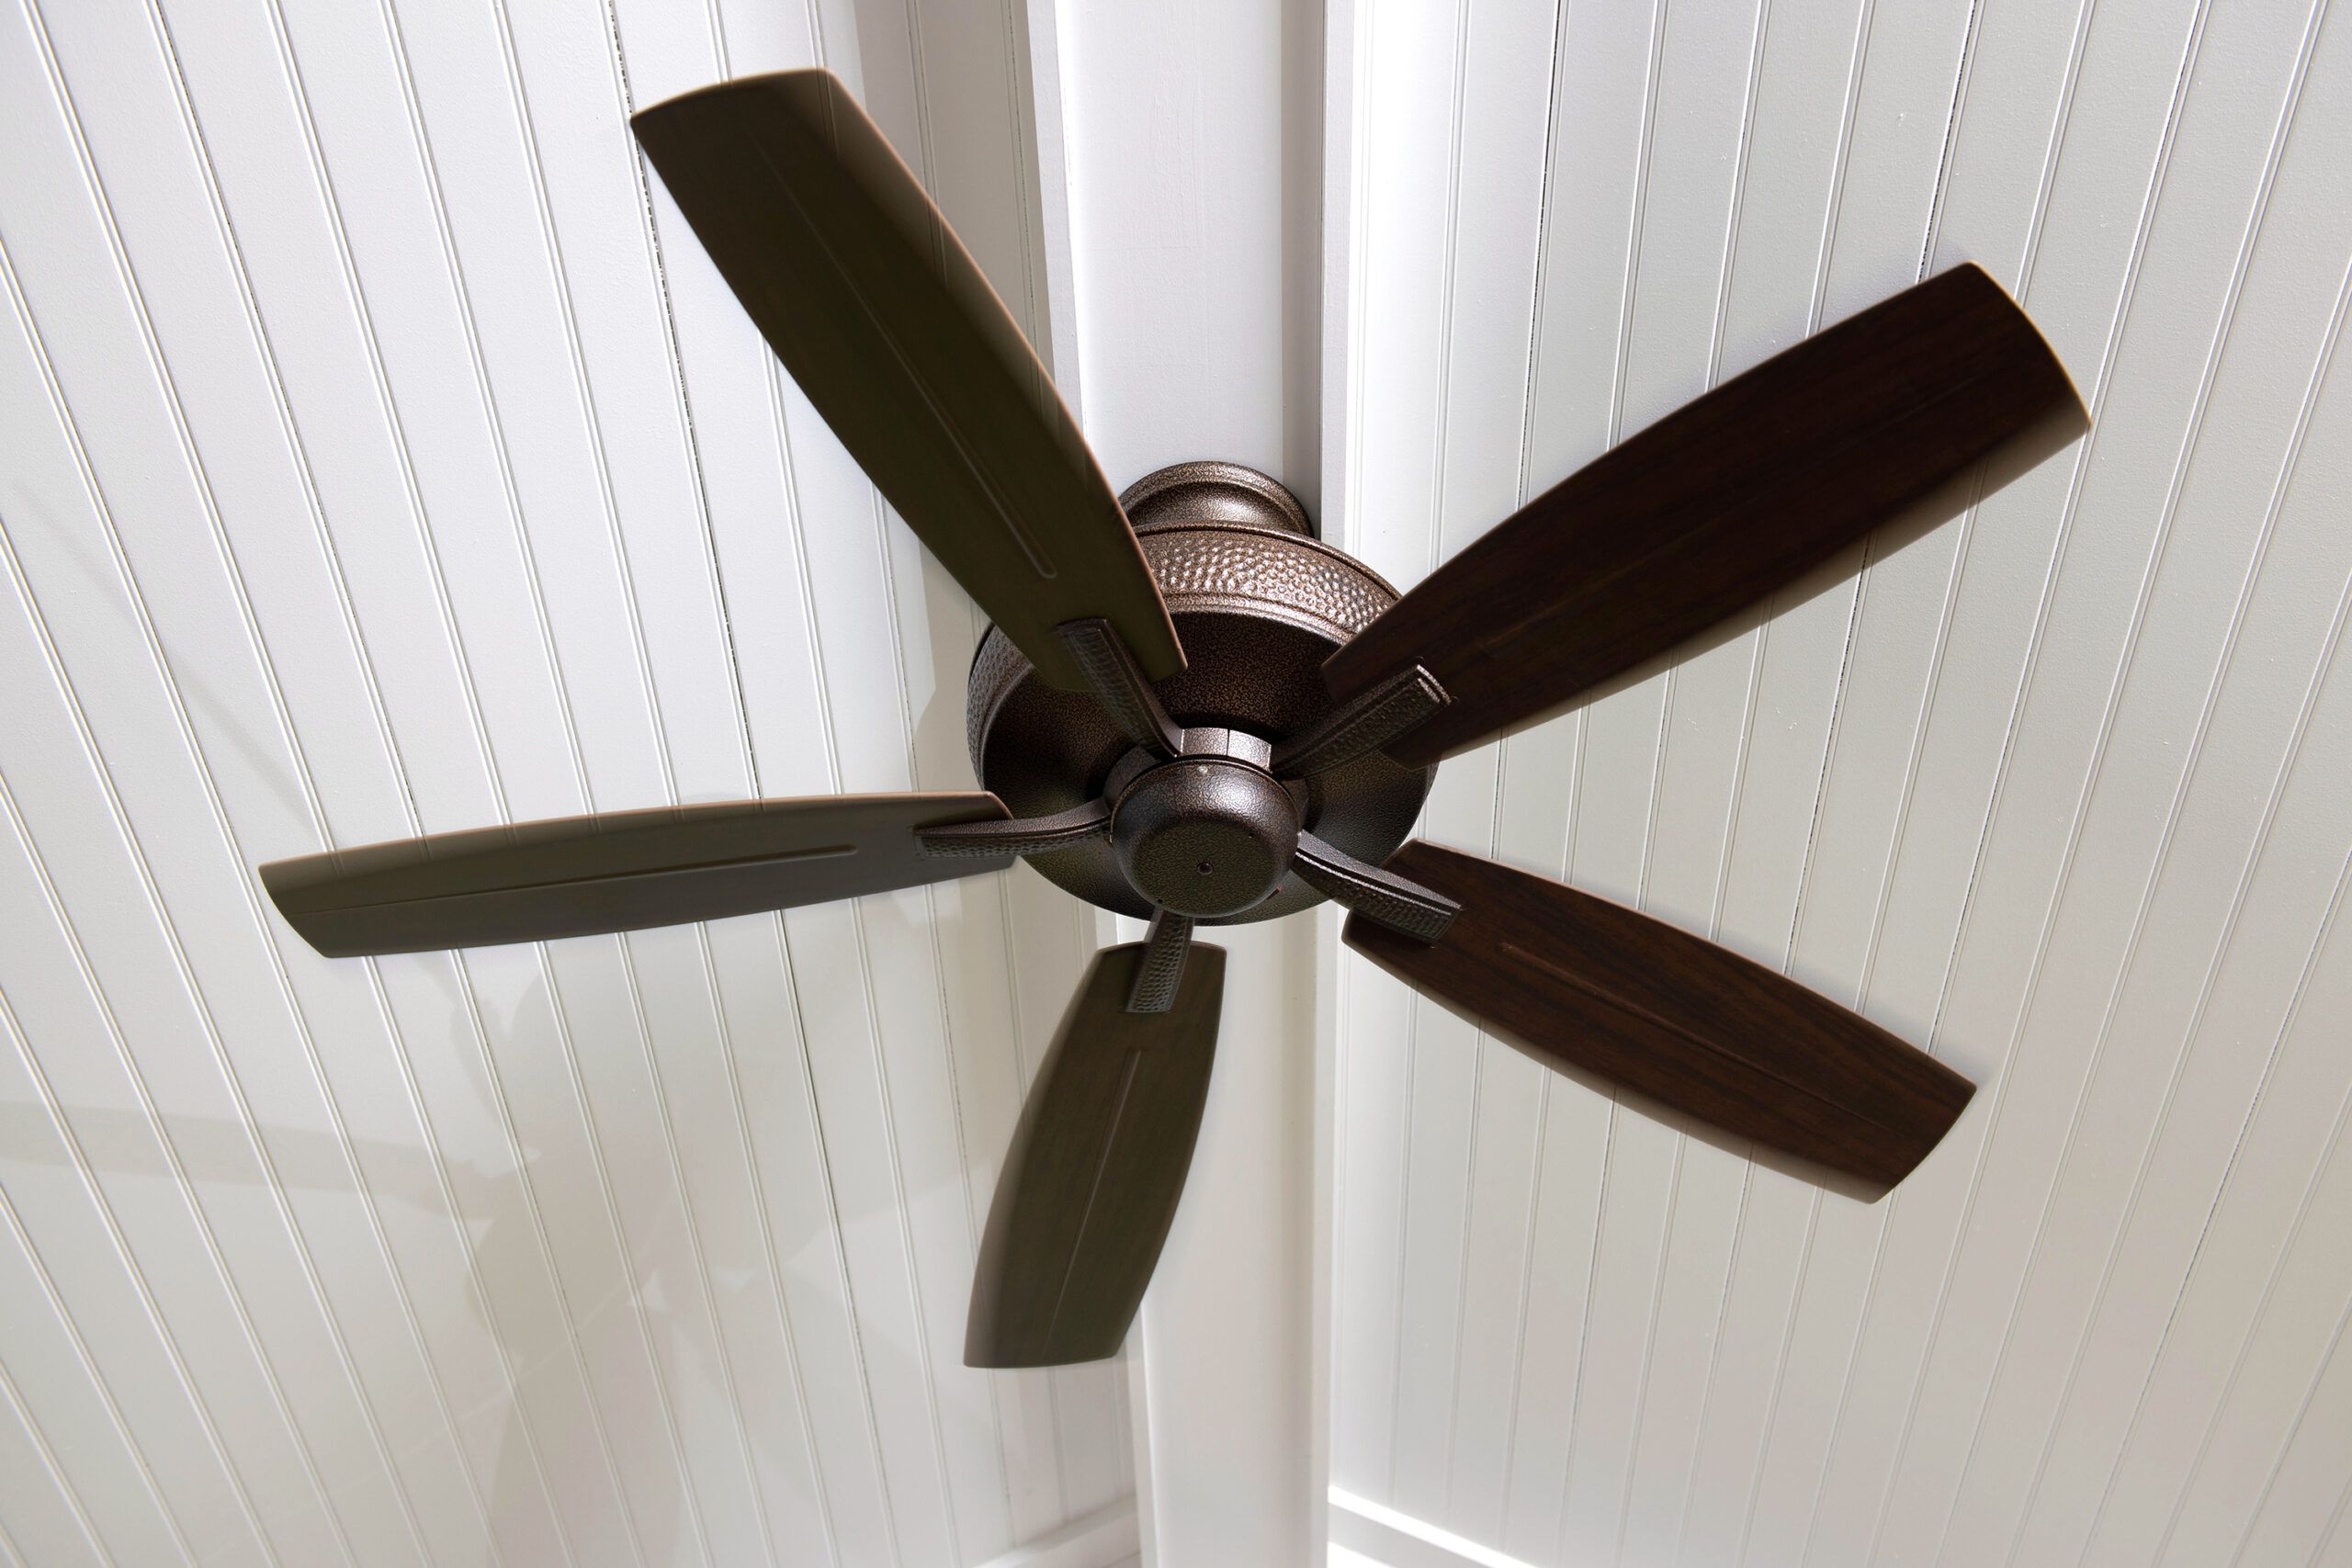 How To Fix Ceiling Fan Chain